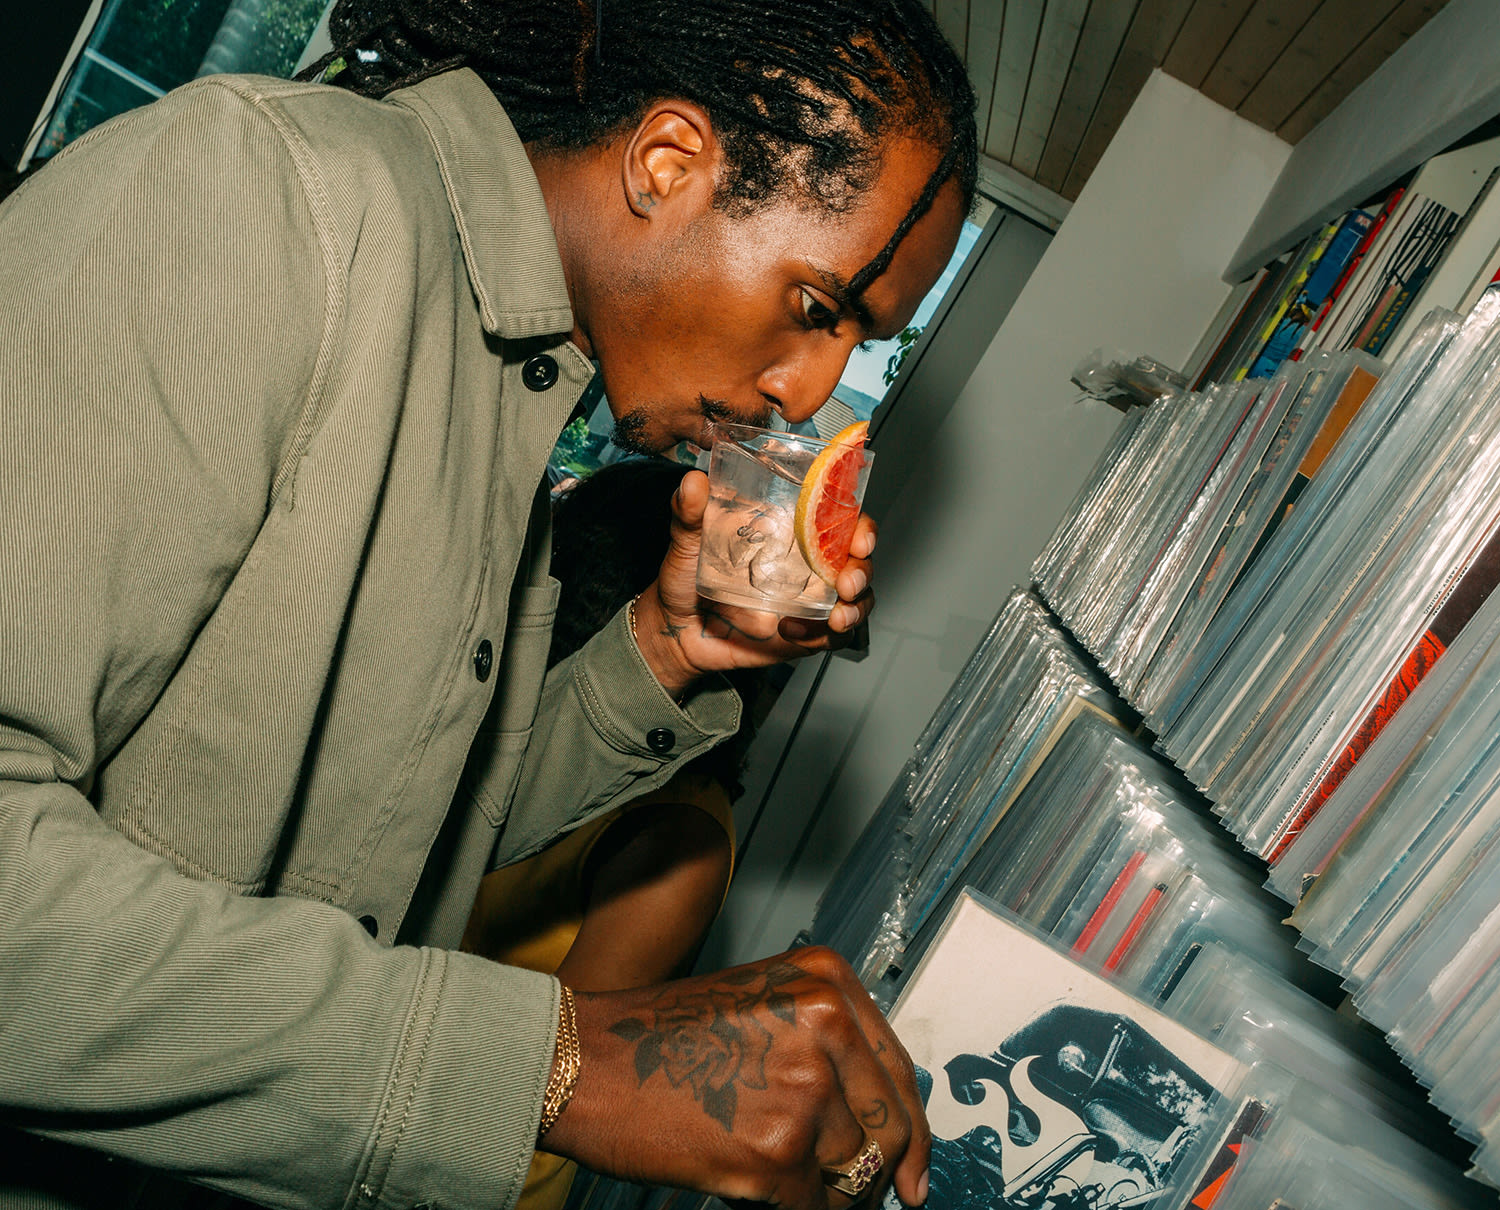 A man sips from a glass while looking at a collection of vinyl records